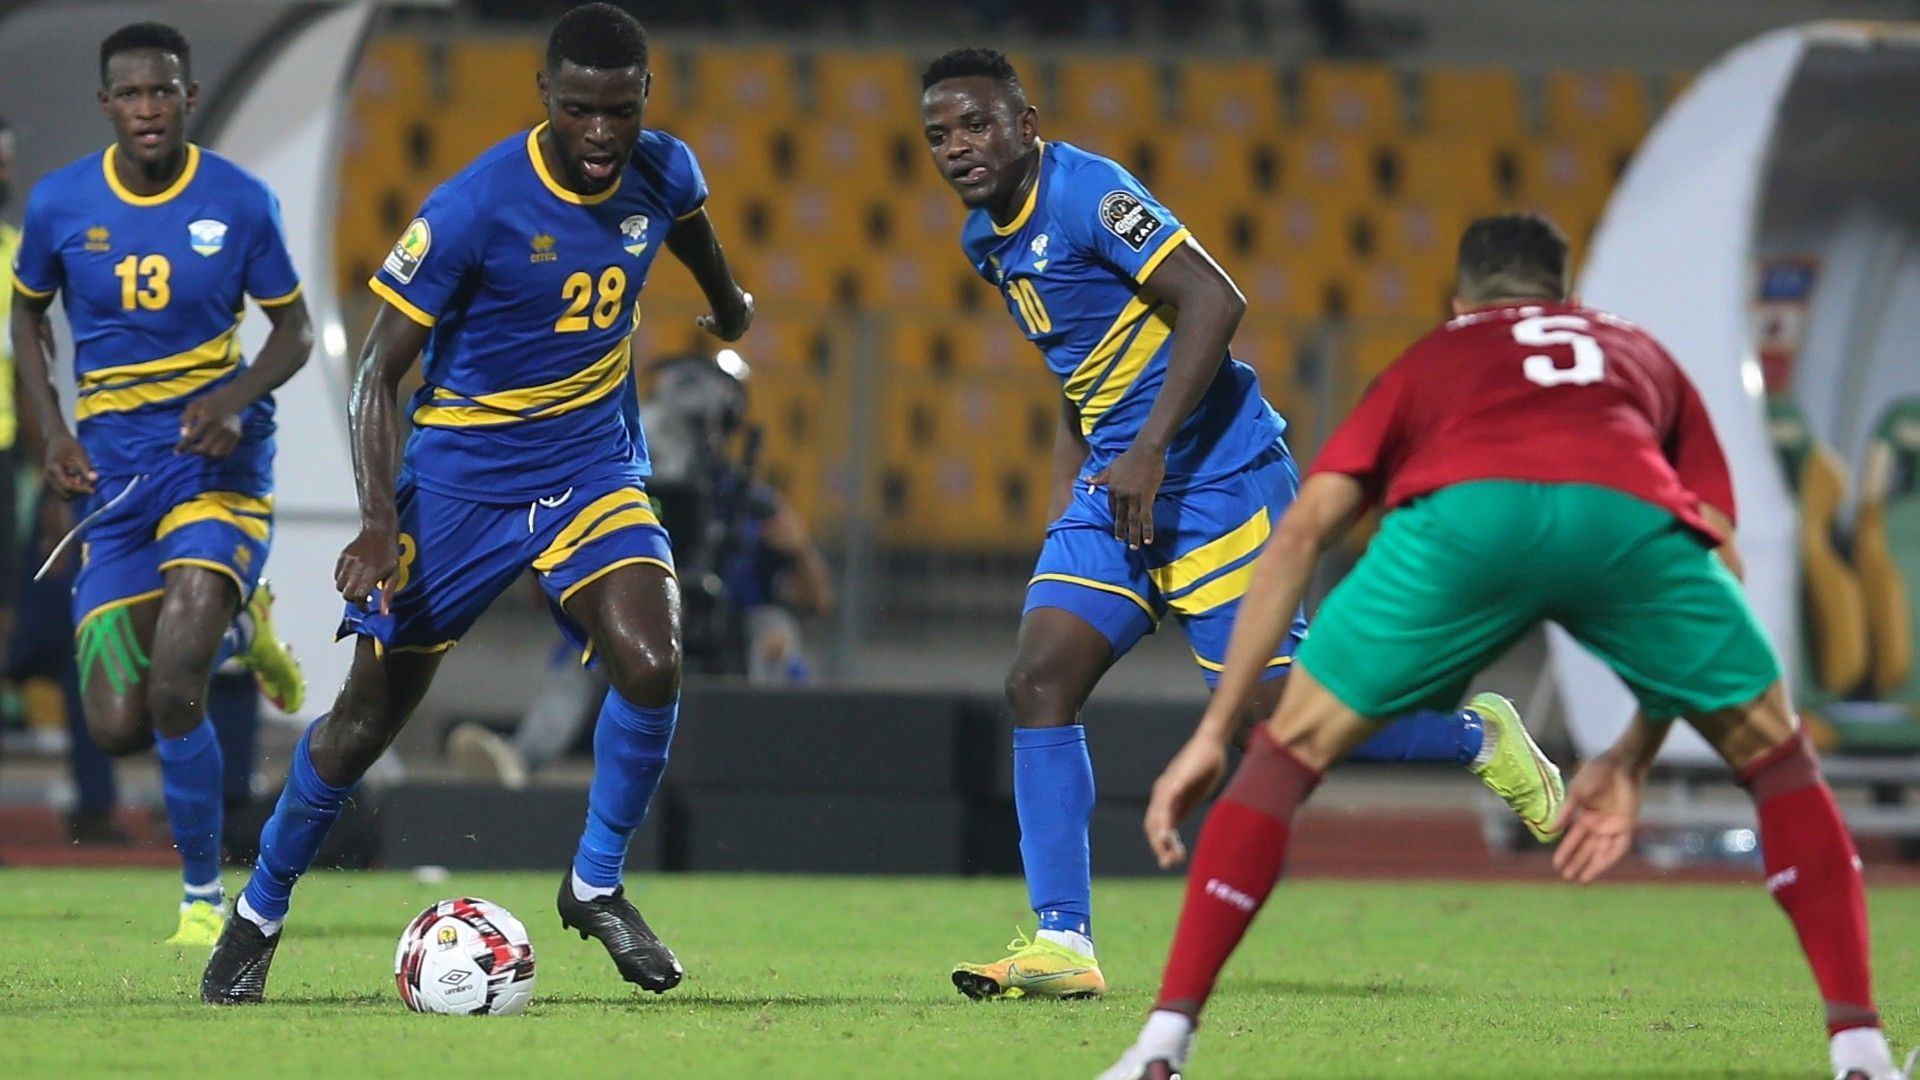 Rwanda and Guinea square off in a second friendly fixture of the month on Thursday